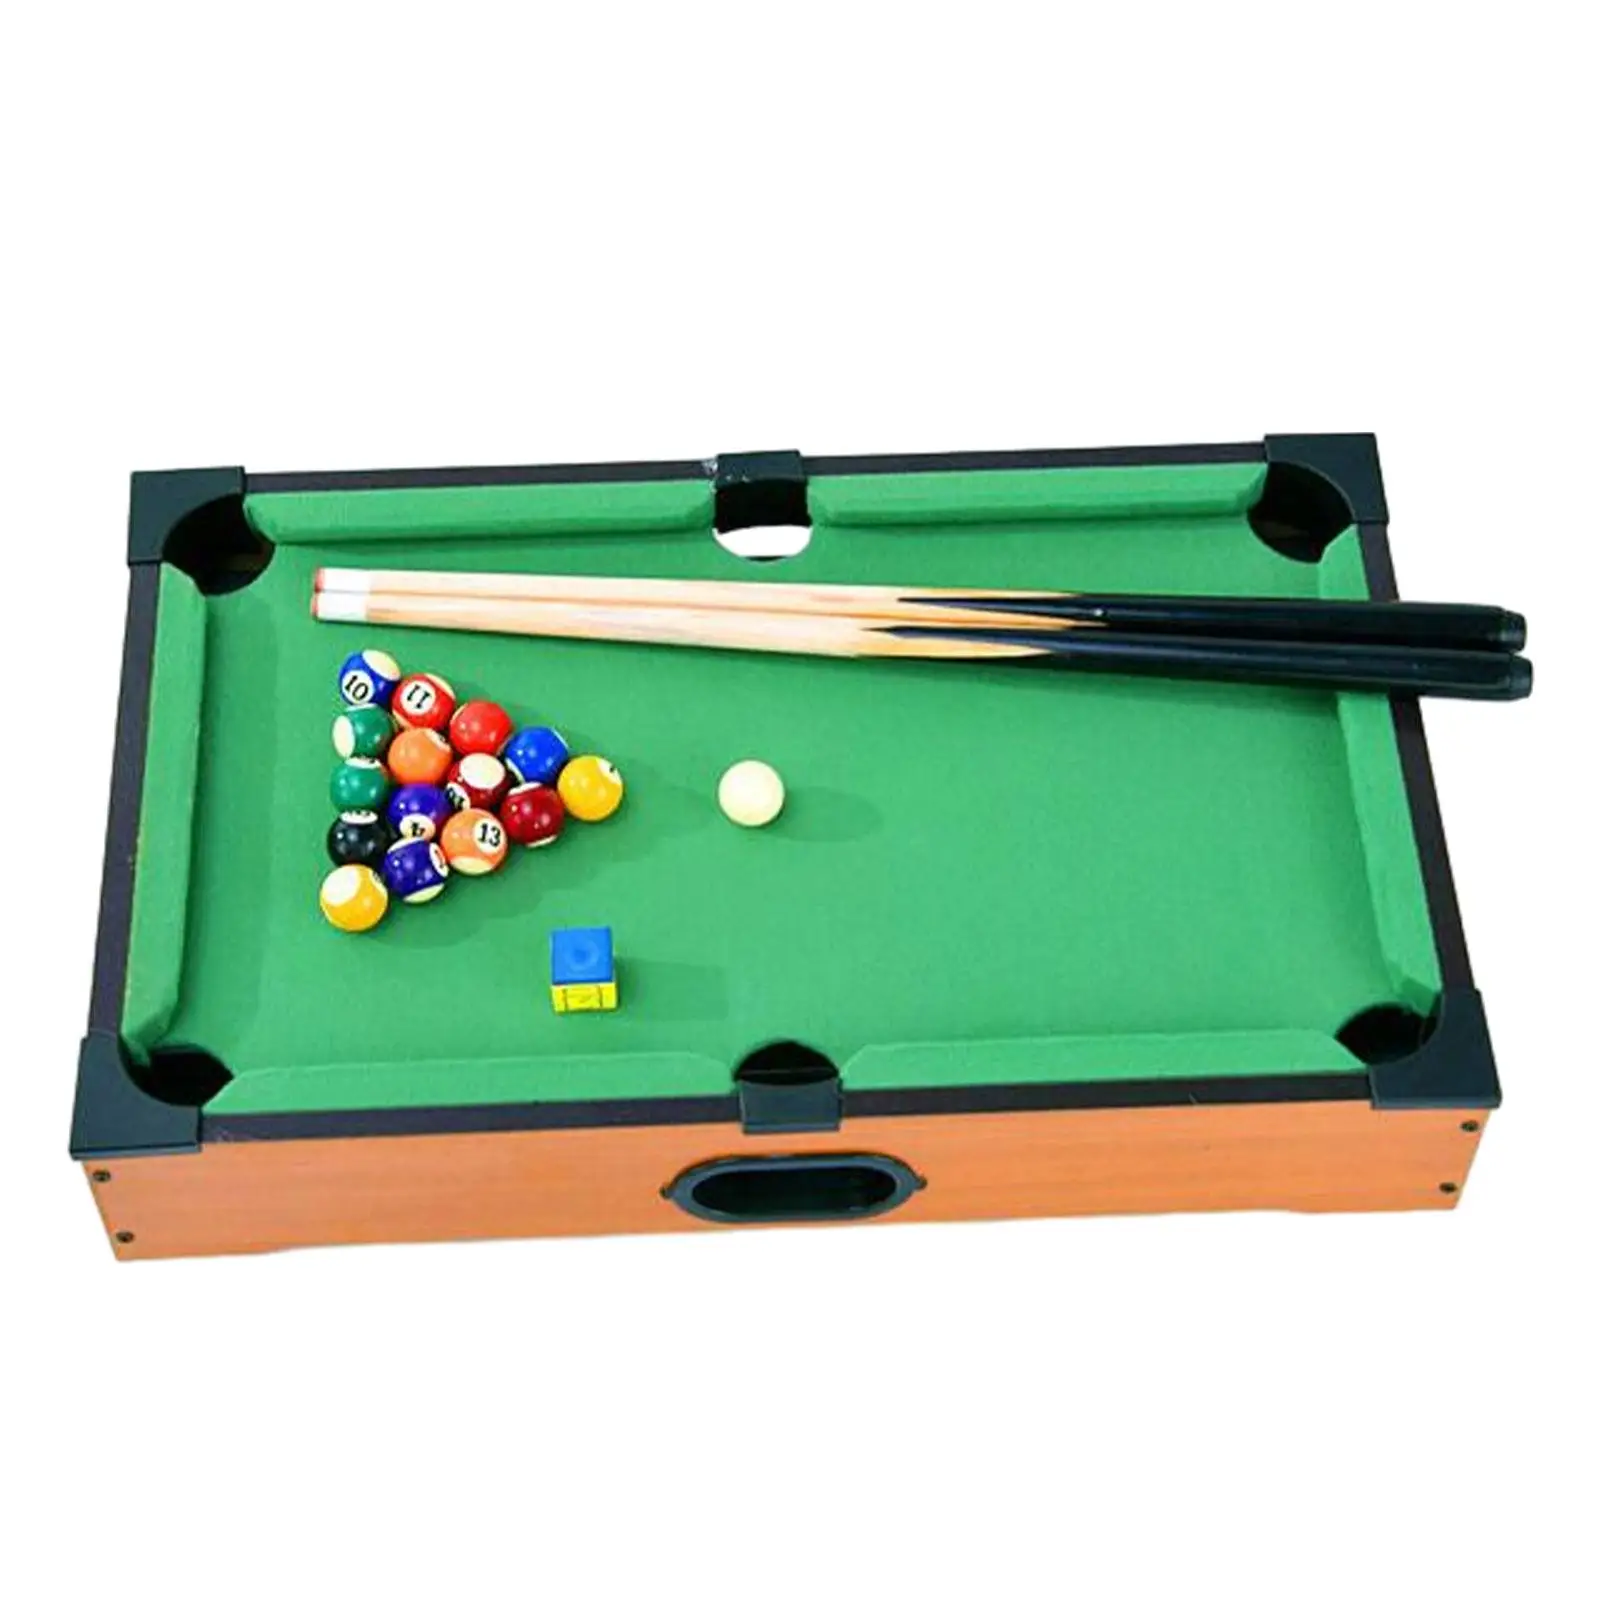 Mini Table Pool Easy to Install Balls Cues Wood for Desktop Playhouse Indoor